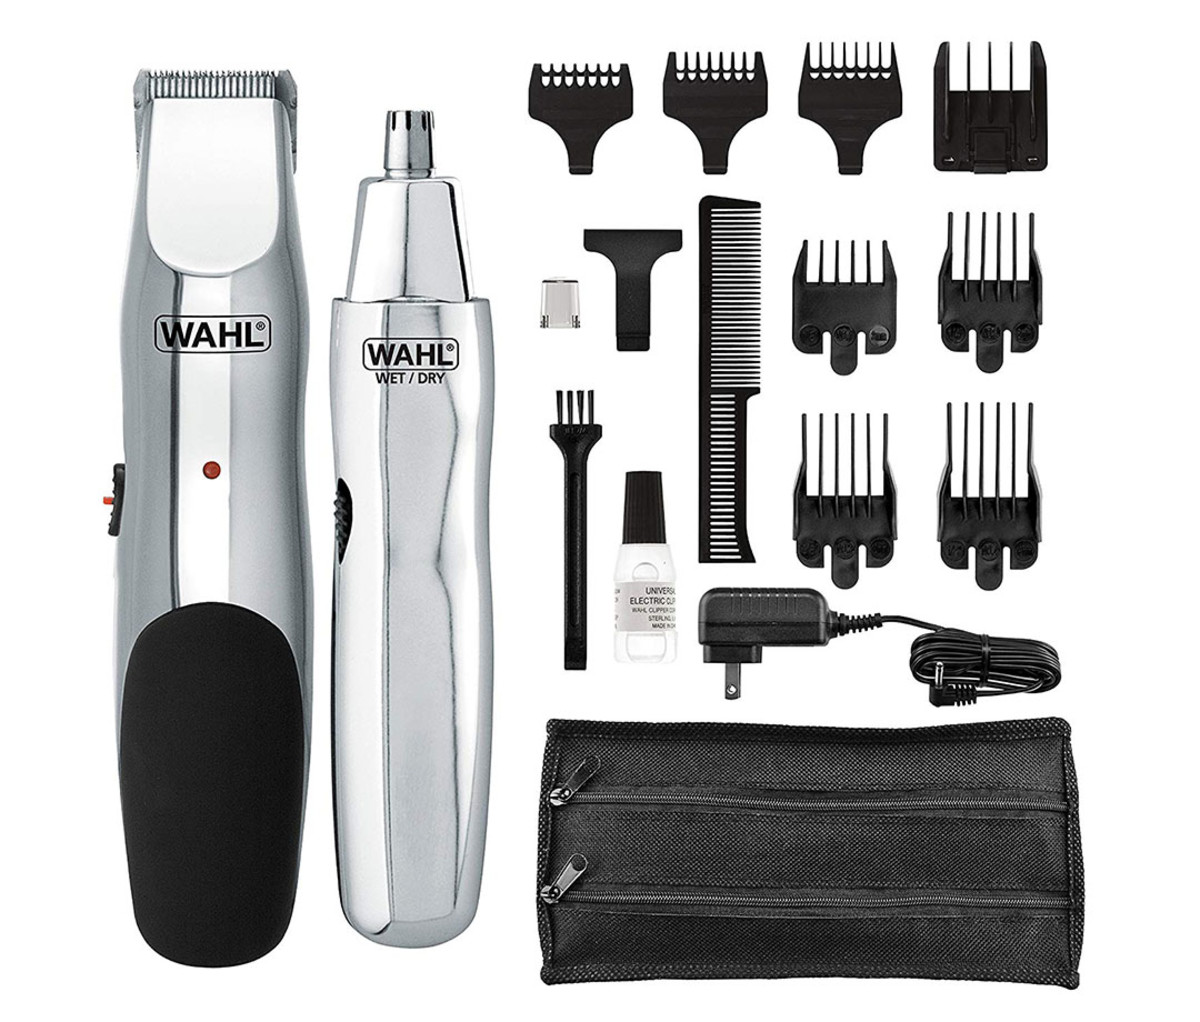 Wahl beard trimmer and detail set